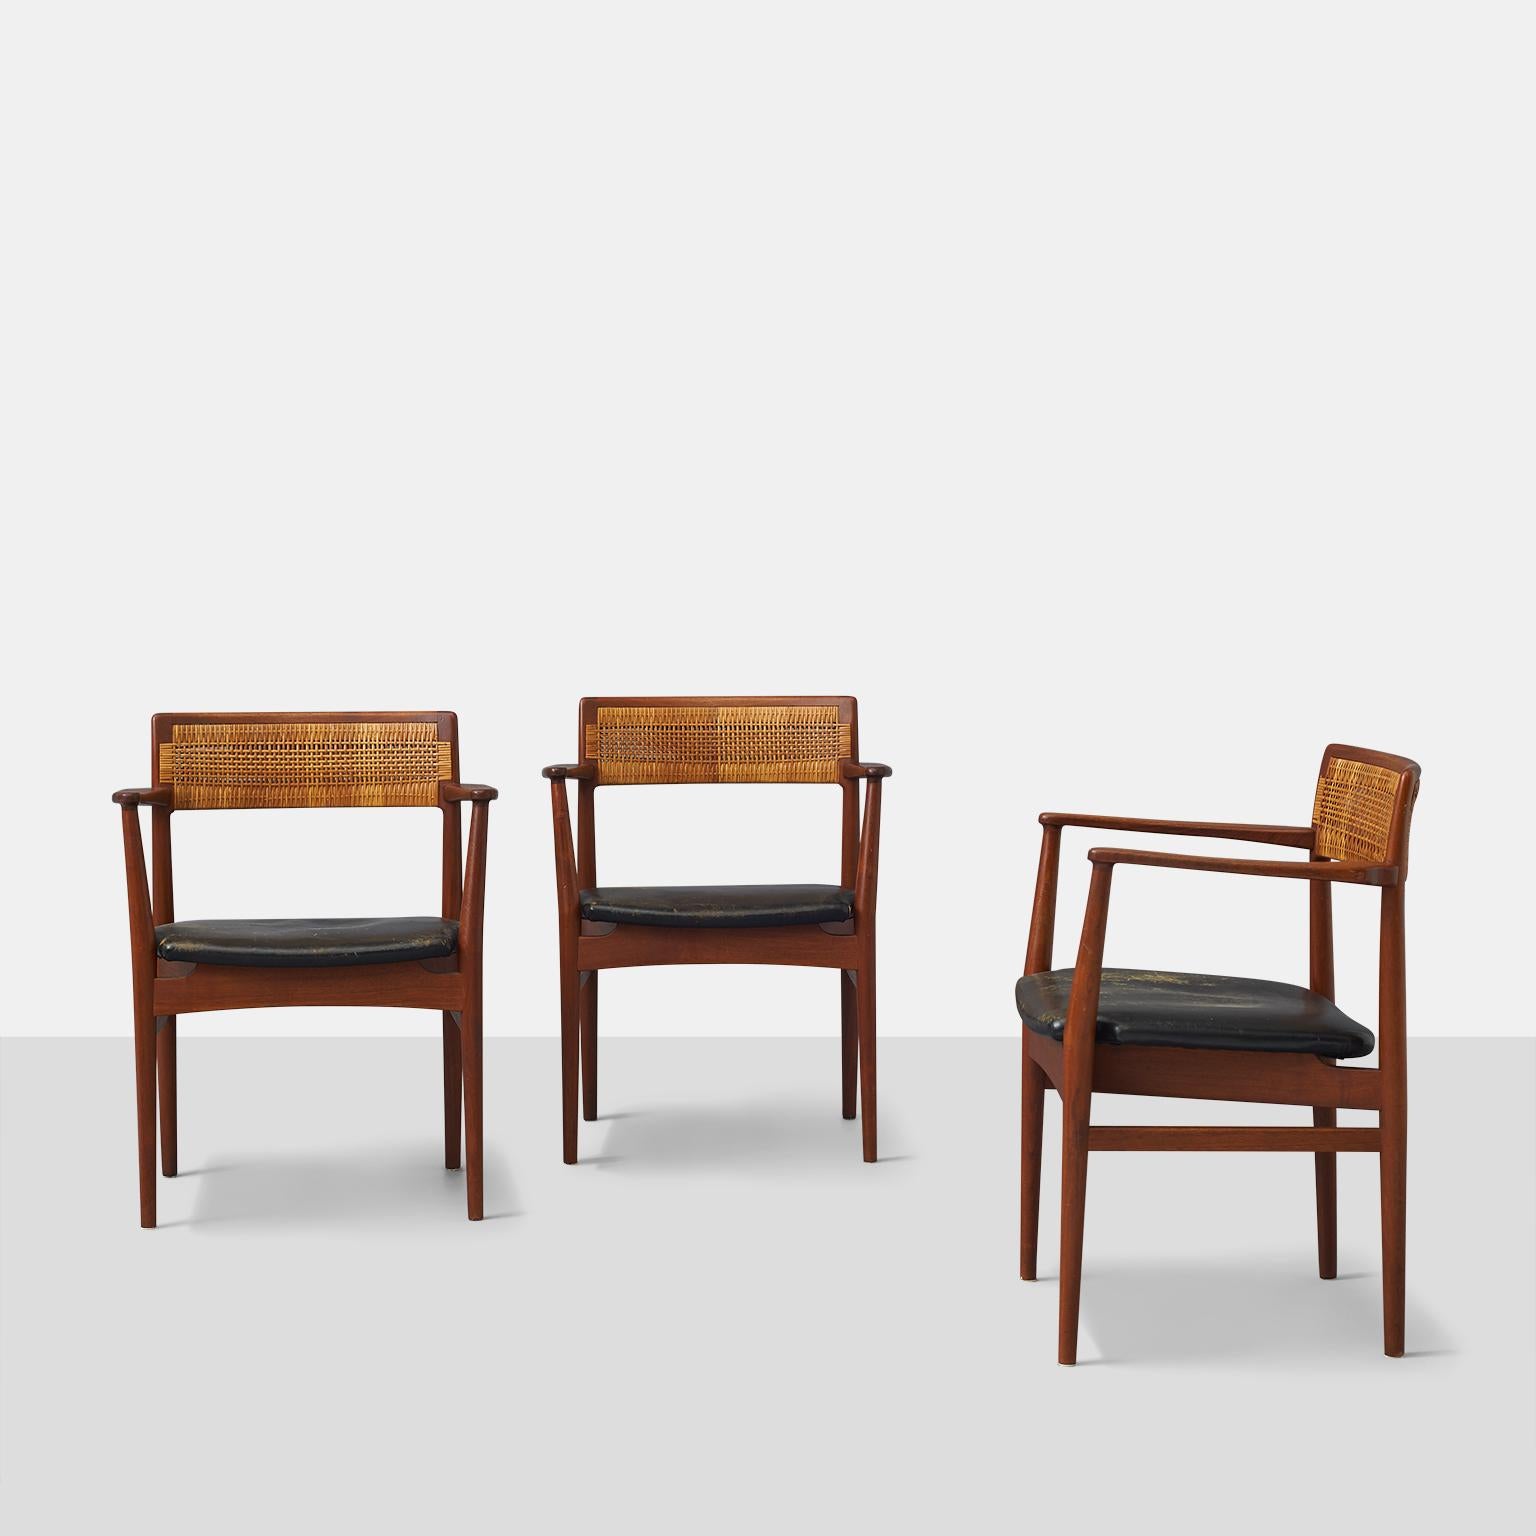 A trio of W26 armchairs by Eric Worts for Henrik Worts. Cane backs and black leather seats.